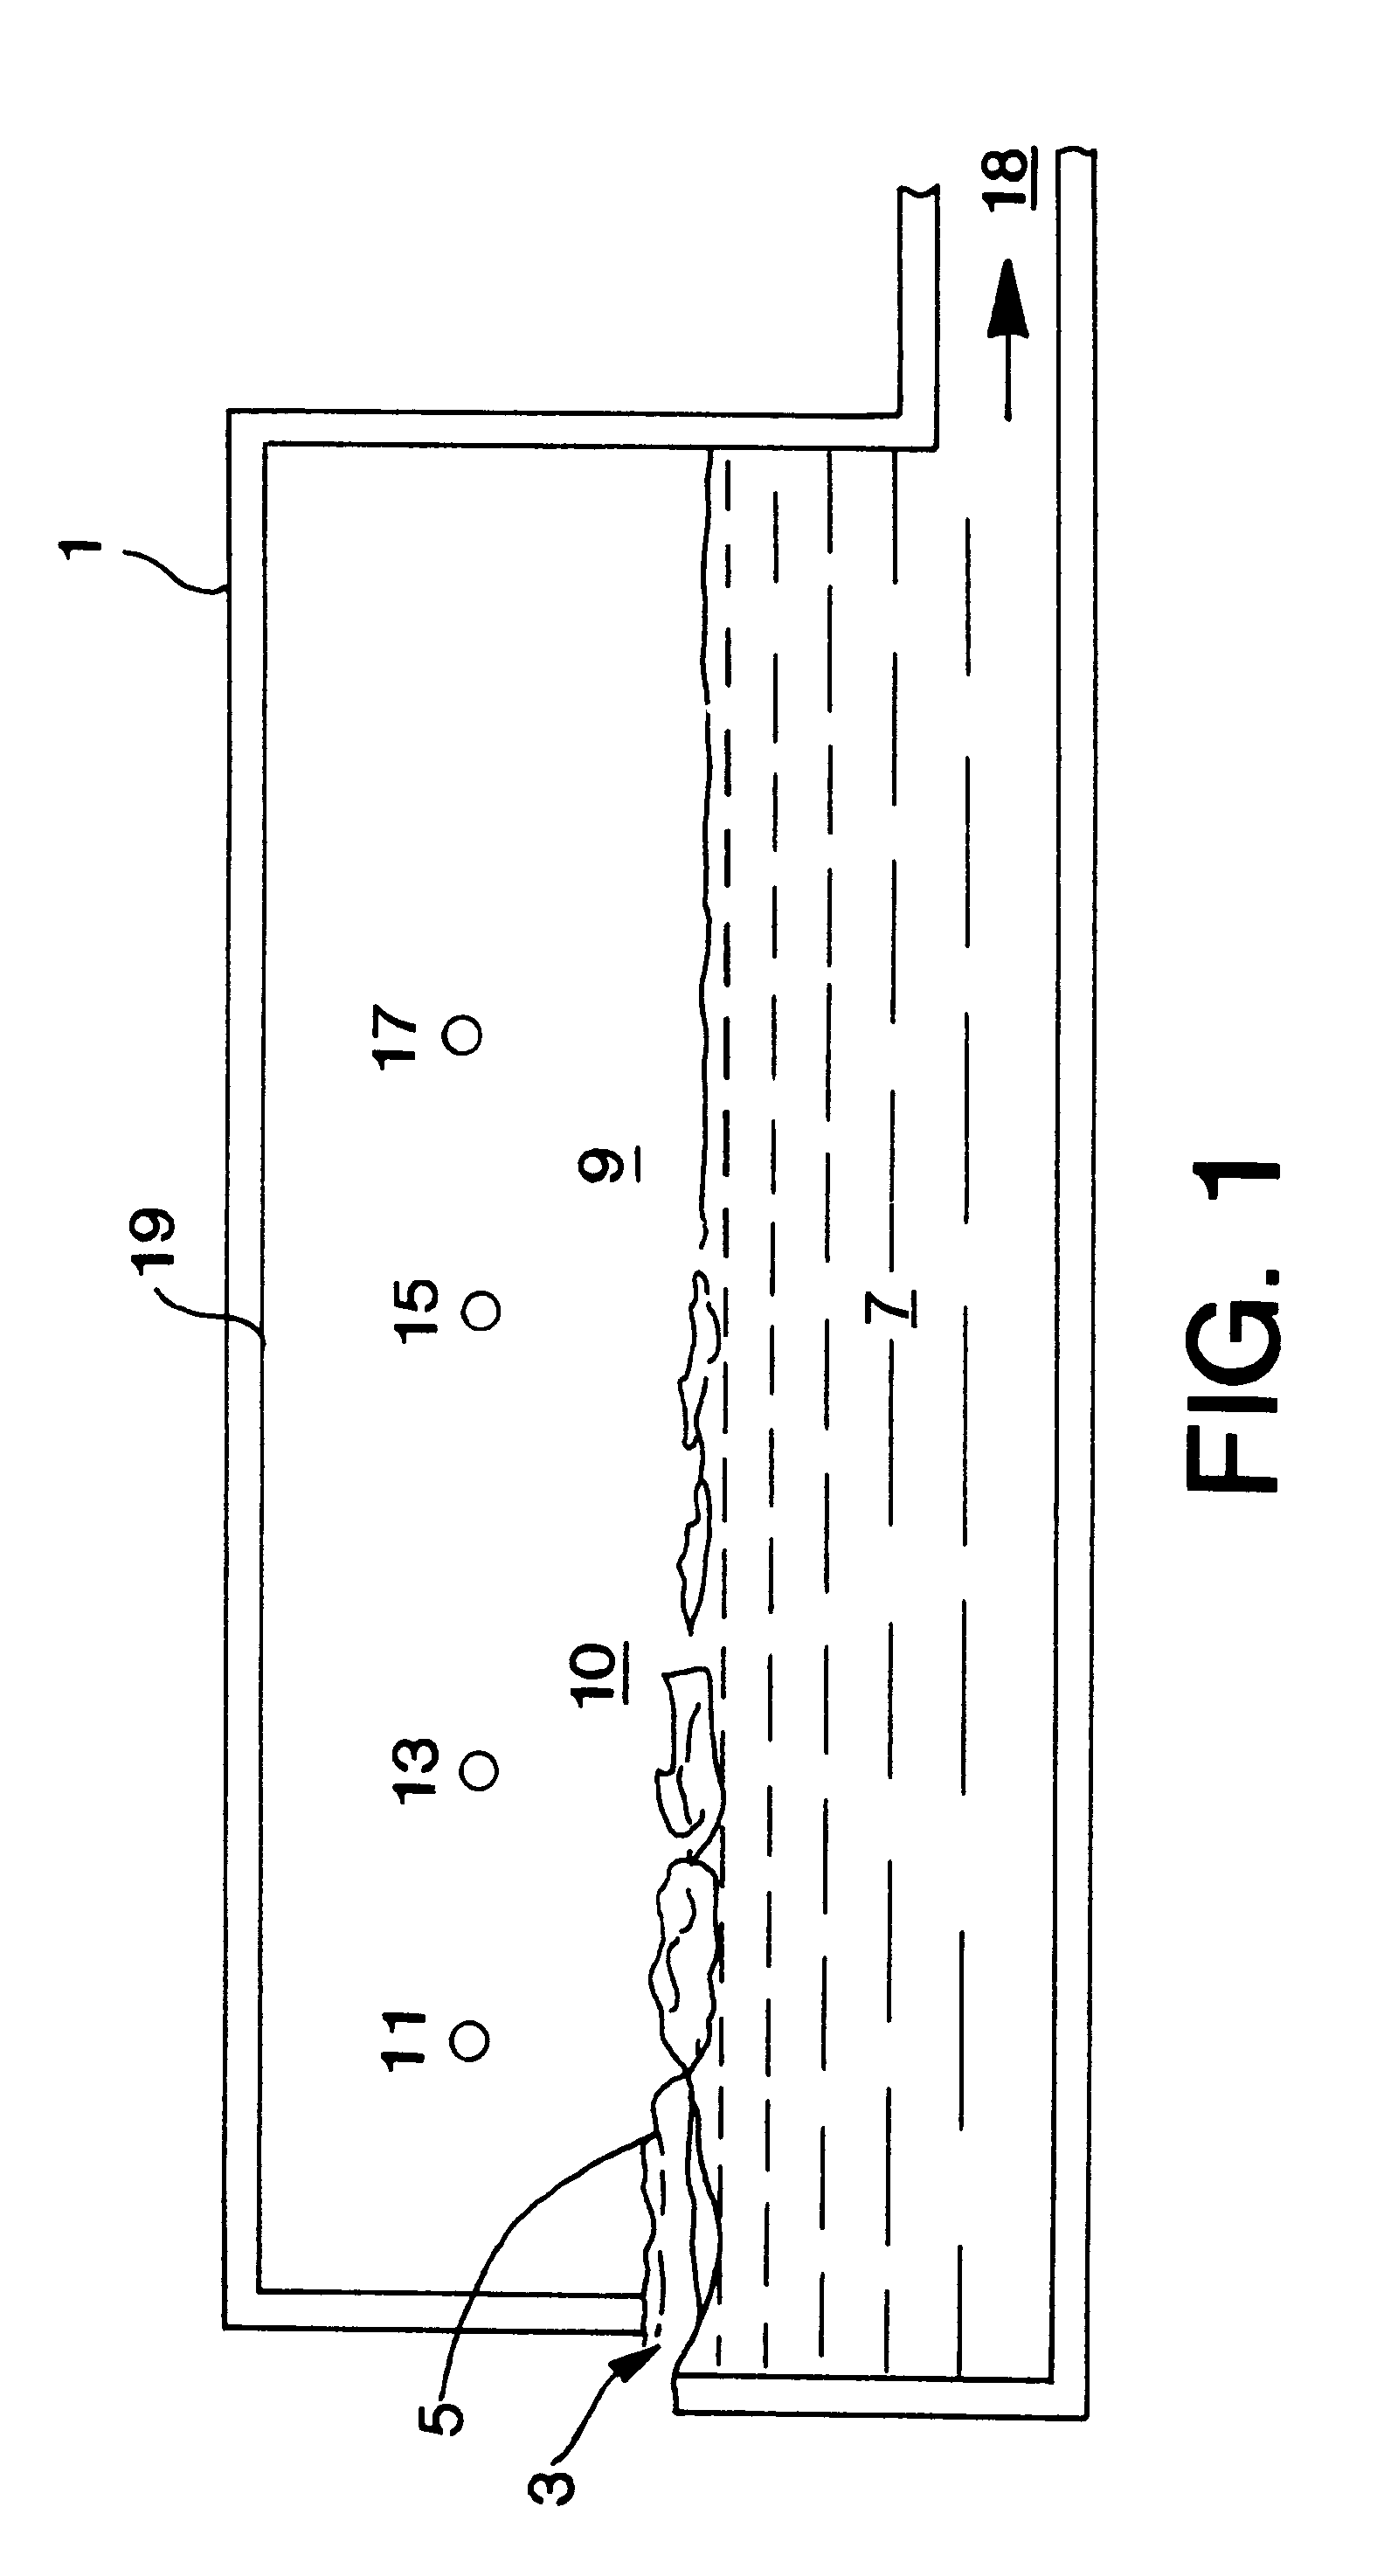 Glass melting process and apparatus with reduced emissions and refractory corrosion